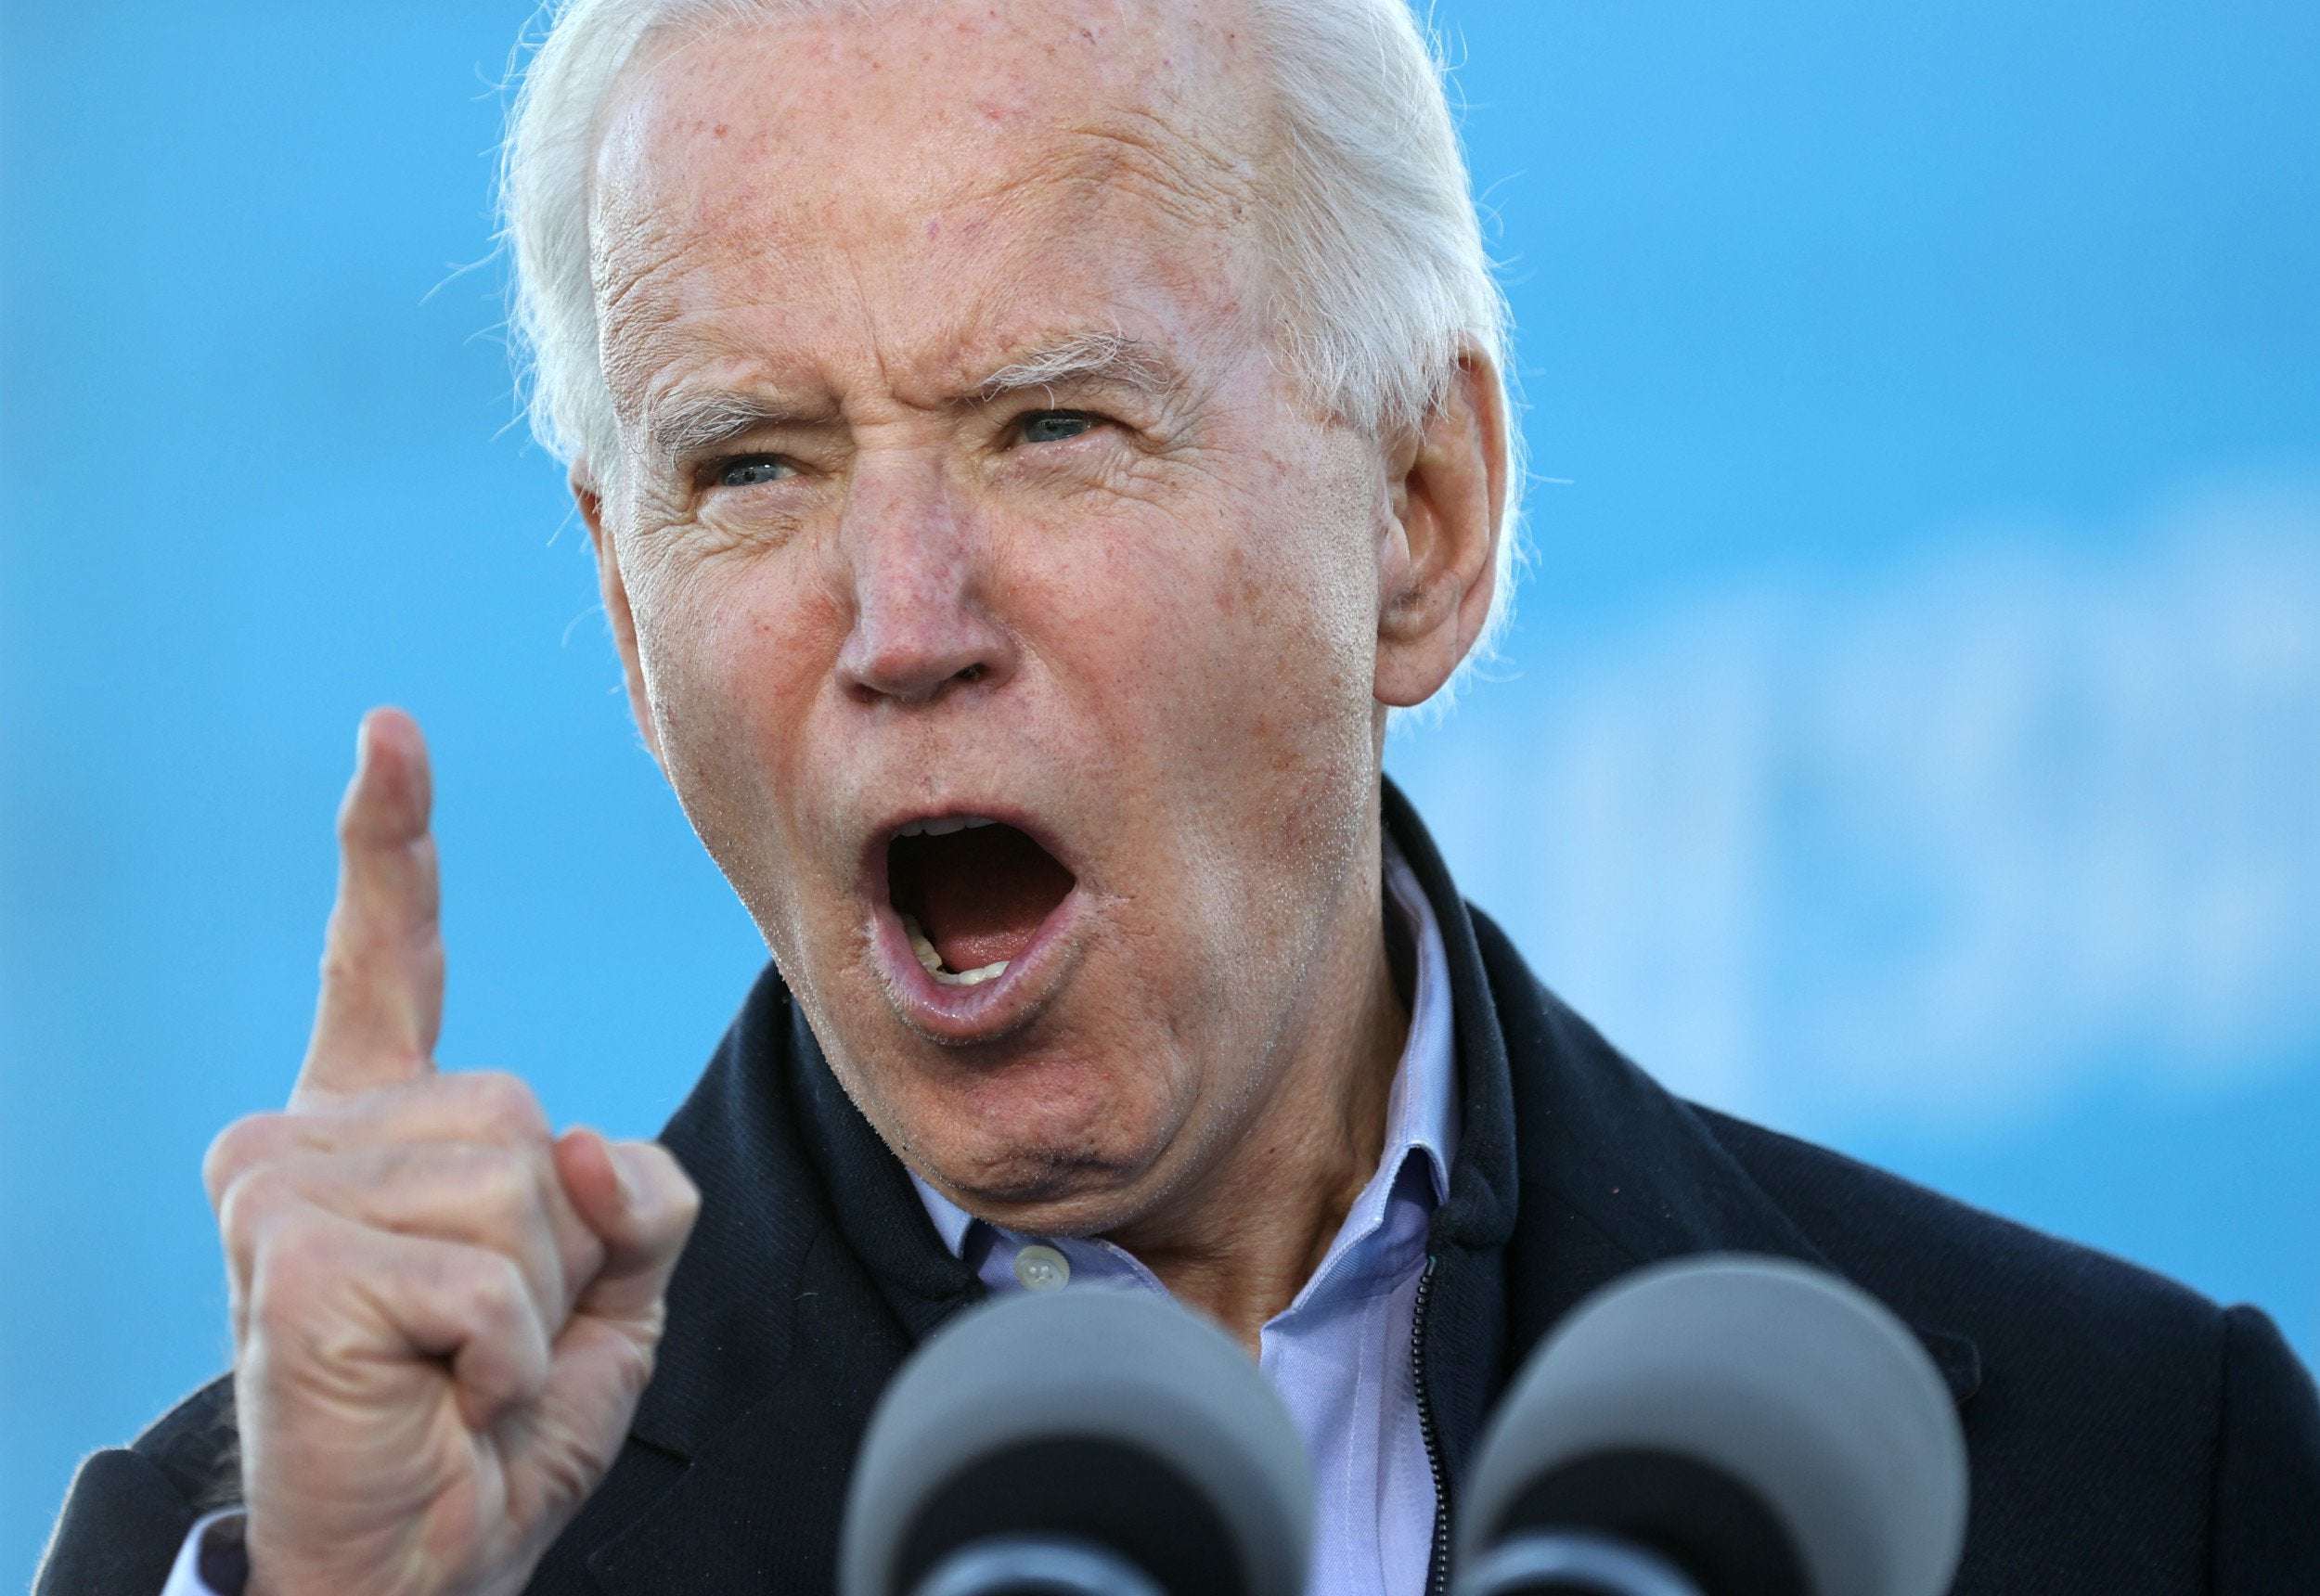 image for Joe Biden Says $2,000 Stimulus Checks 'Will Never Get There' if Loeffler and Perdue Elected